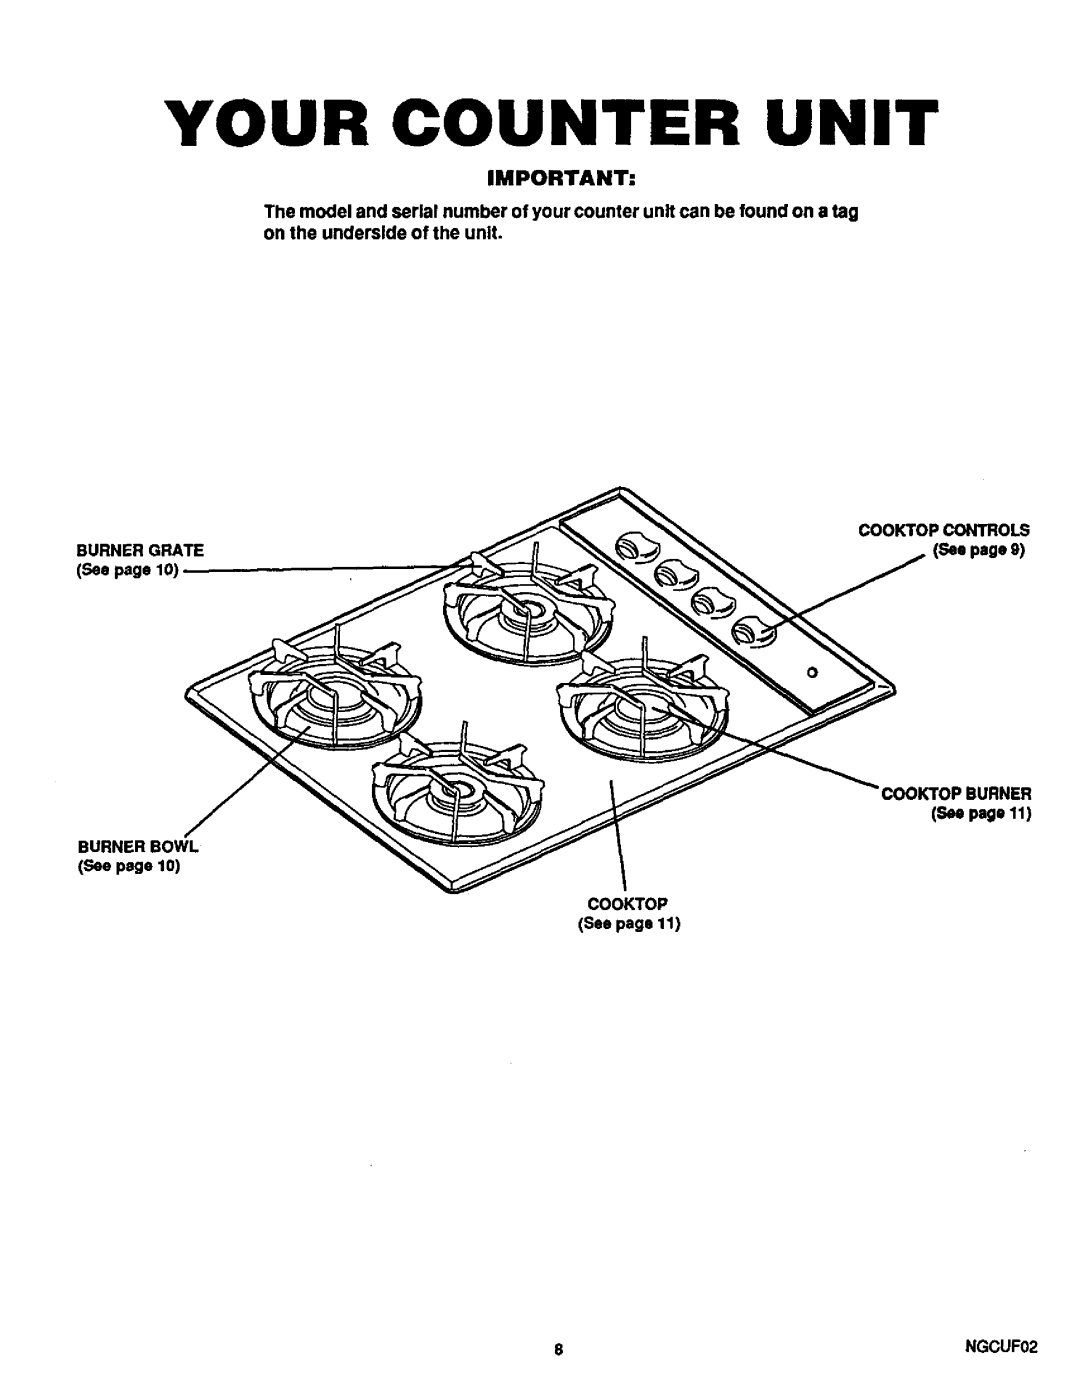 Sears 32O2O Your Counter Unit, Cooktop Controls, See page BURNER BOWL See page COOKTOP See page, NGCUF02, Burner 